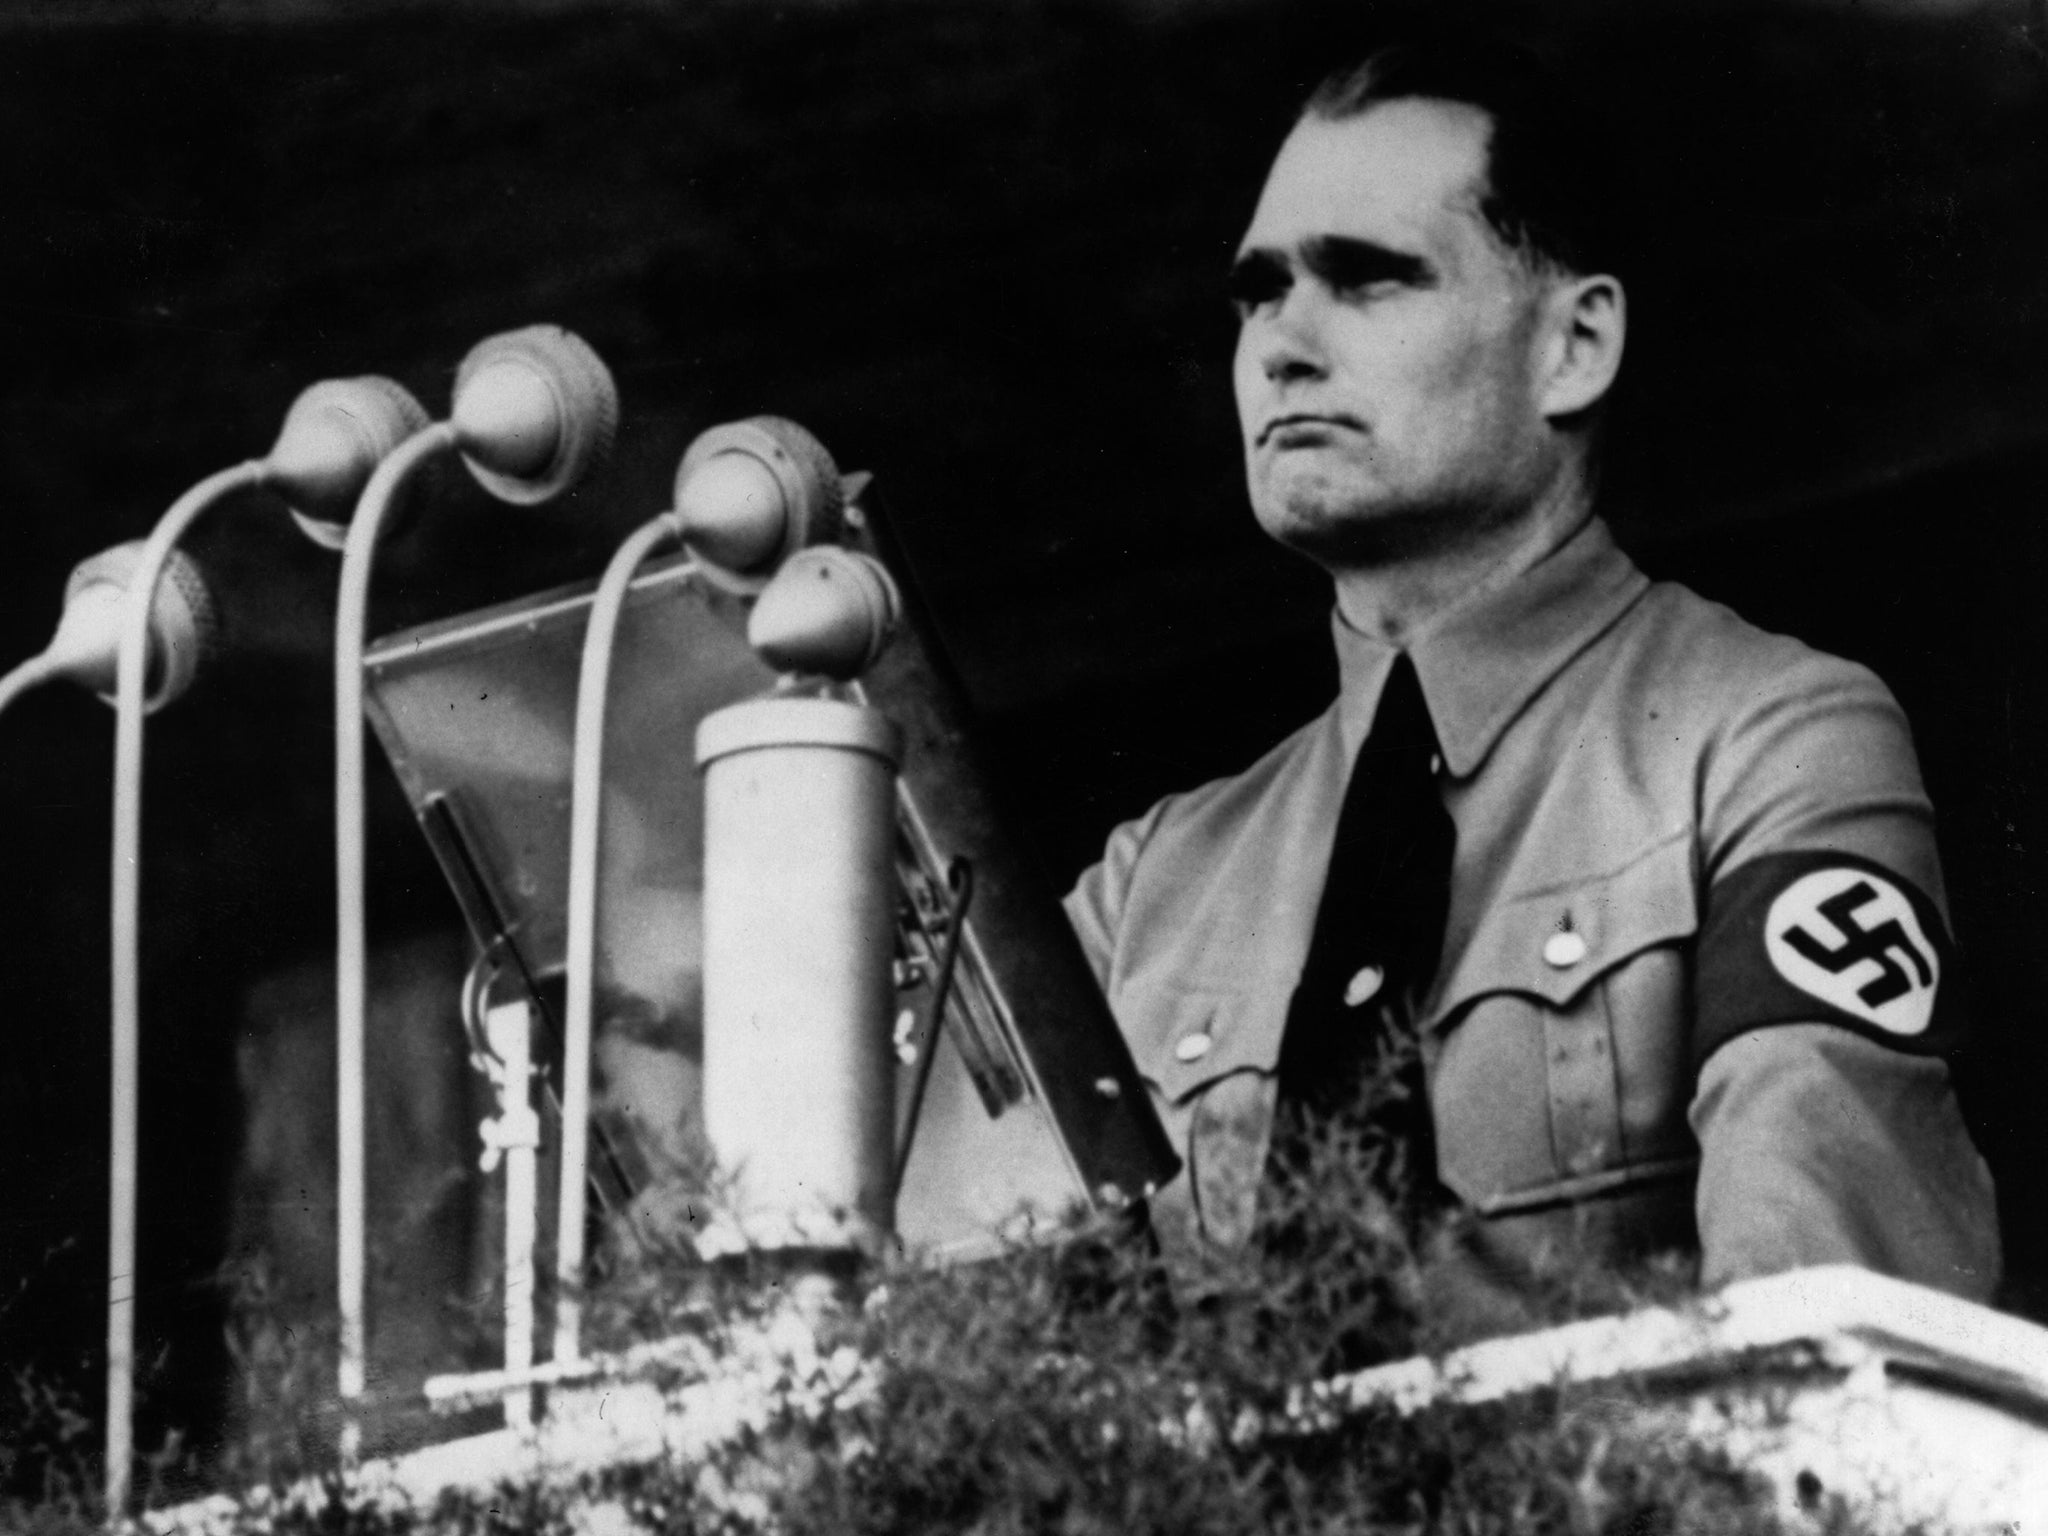 Rudolf Hess was Adolf Hitler's wartime deputy before he flew from Germany to Scotland in an apparent attempt to negotiate a peace deal